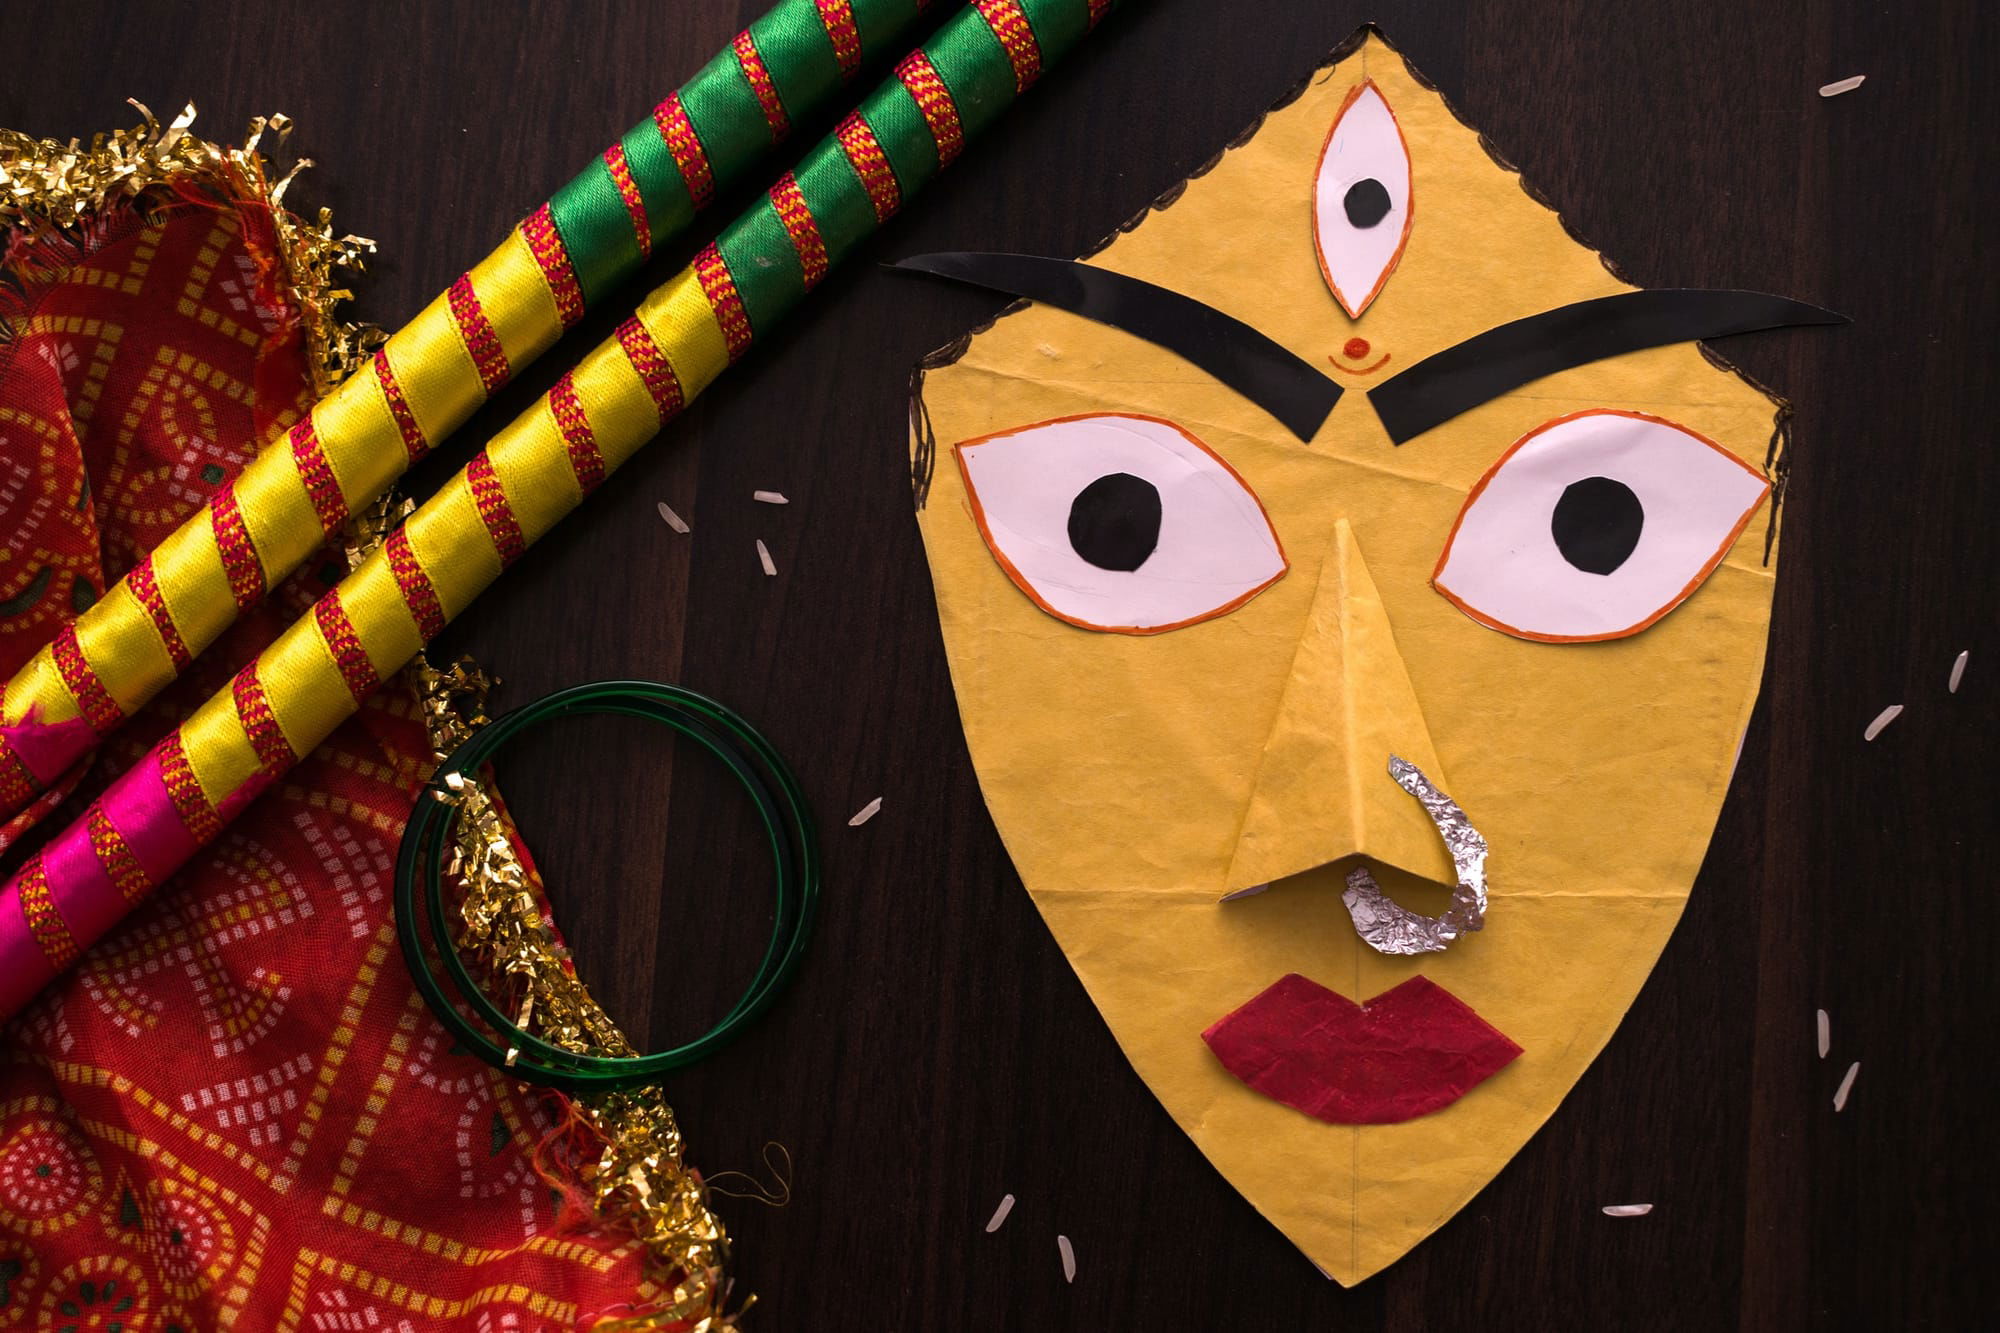 What is GUPT NAVRATRI and why is it important for Sadhana and Siddhi?